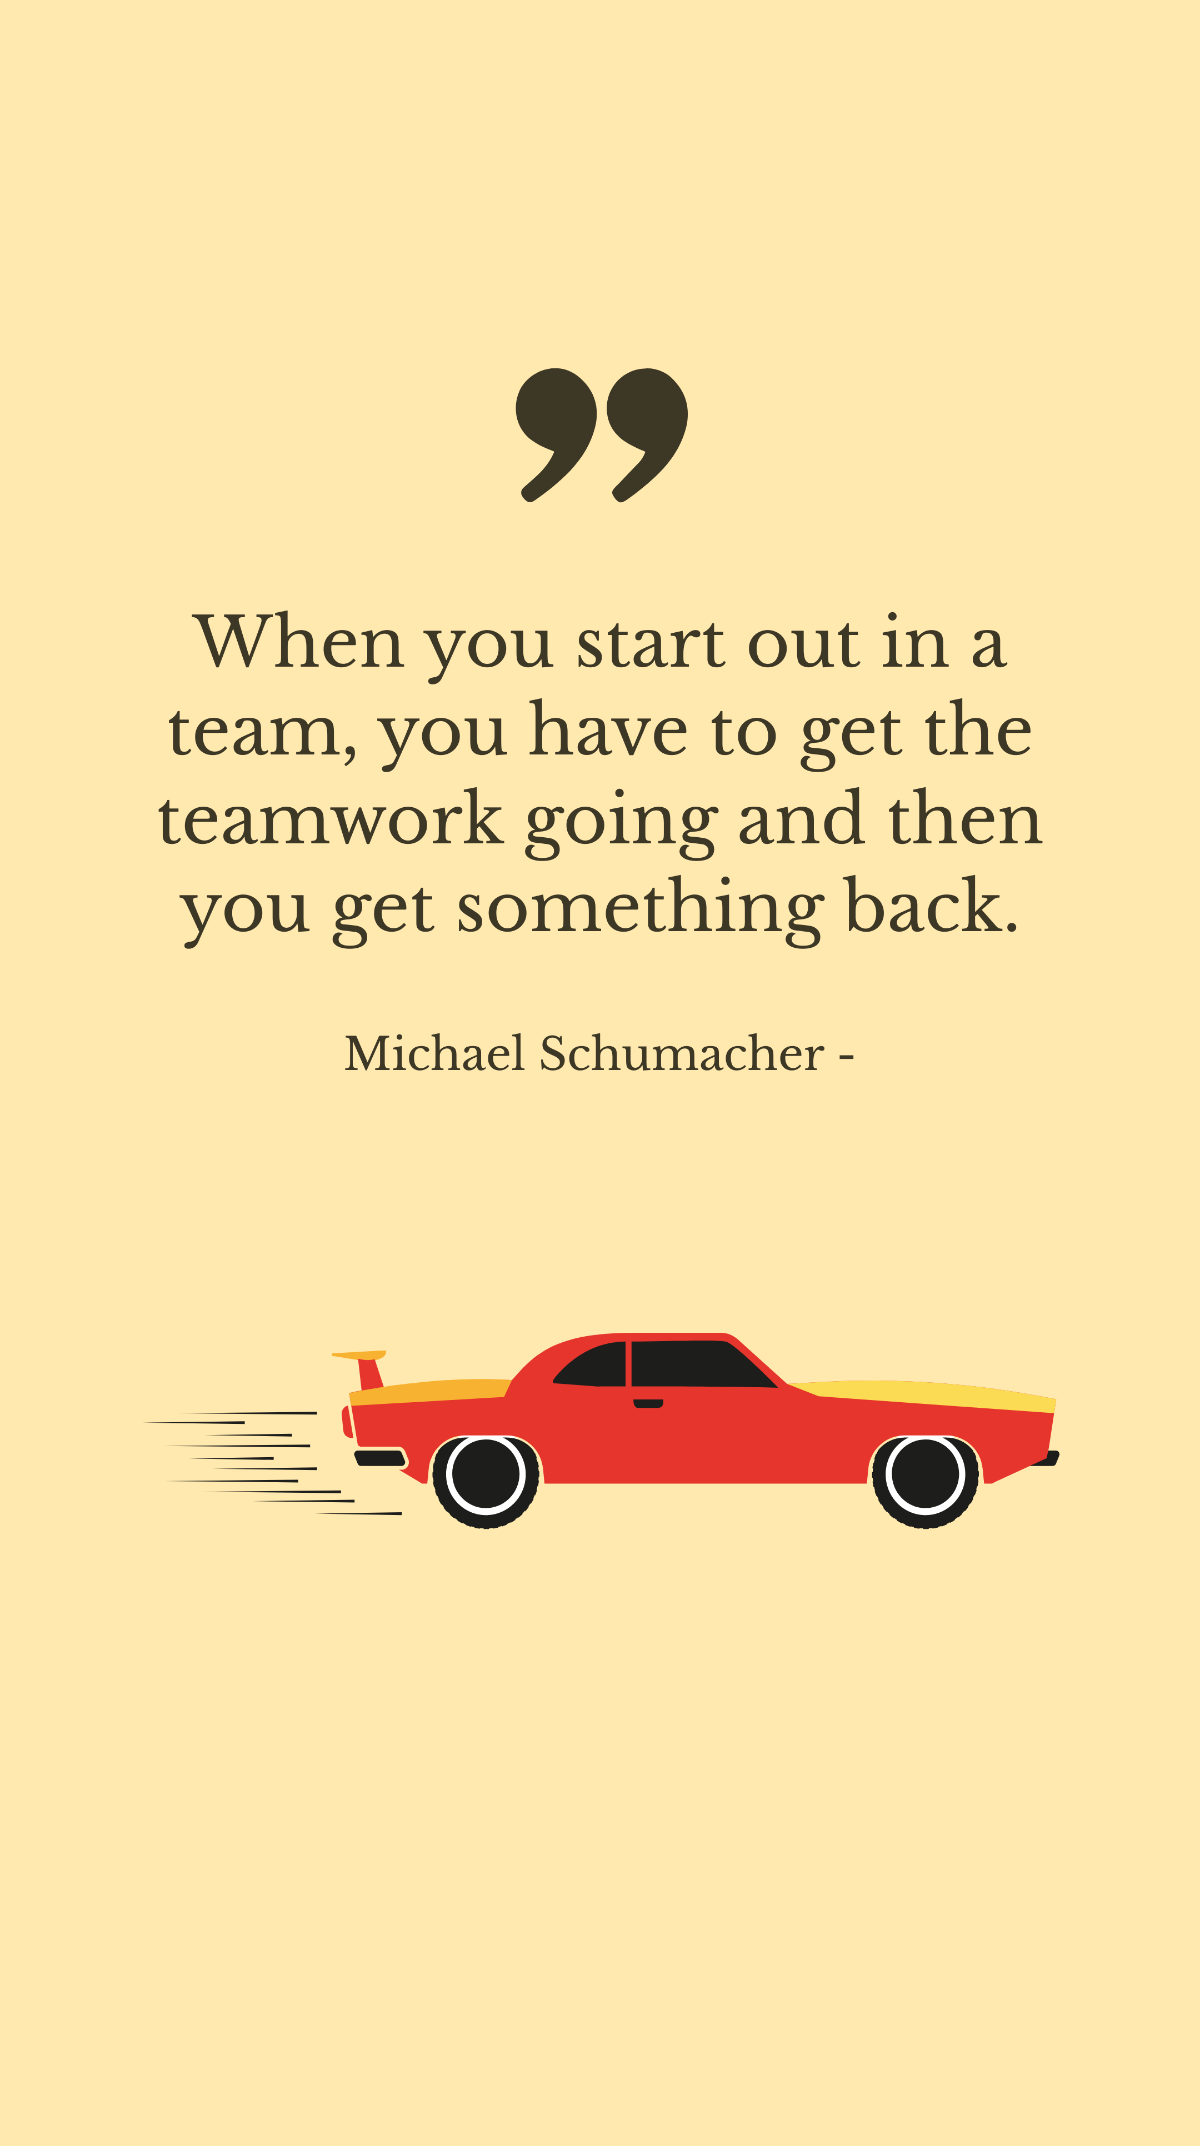 Free Michael Schumacher - When you start out in a team, you have to get the teamwork going and then you get something back. Template